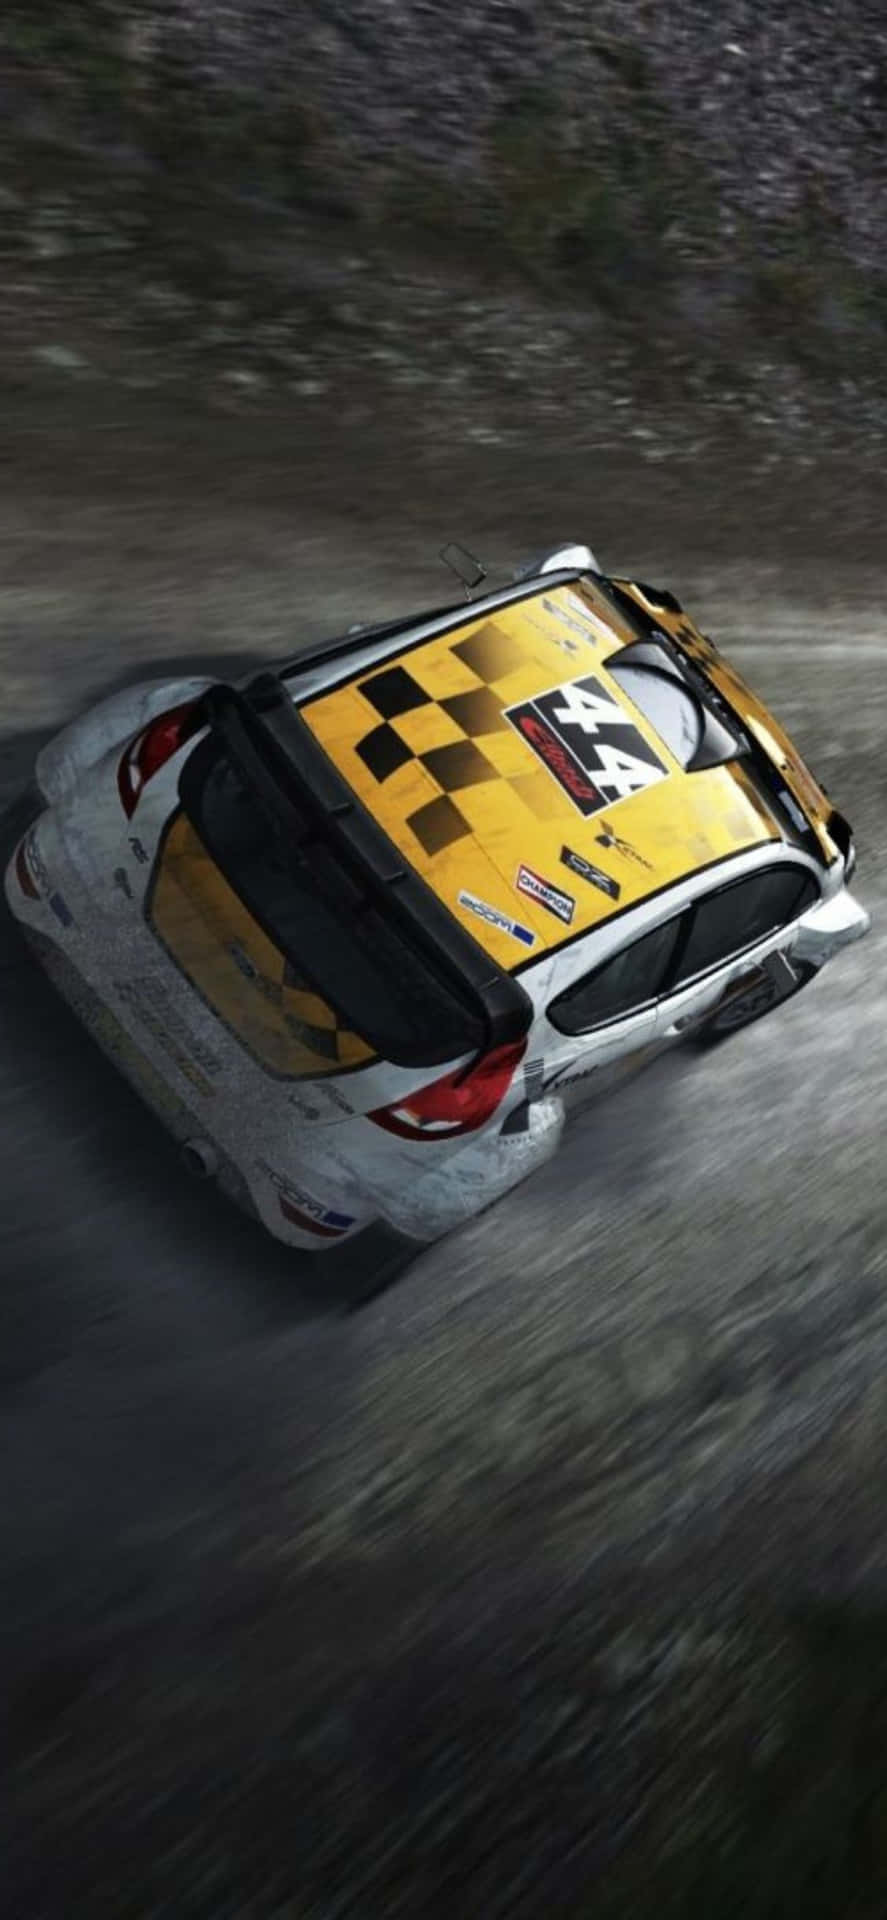 Don't let anything get in the way of your next Dirt Rally adventure!